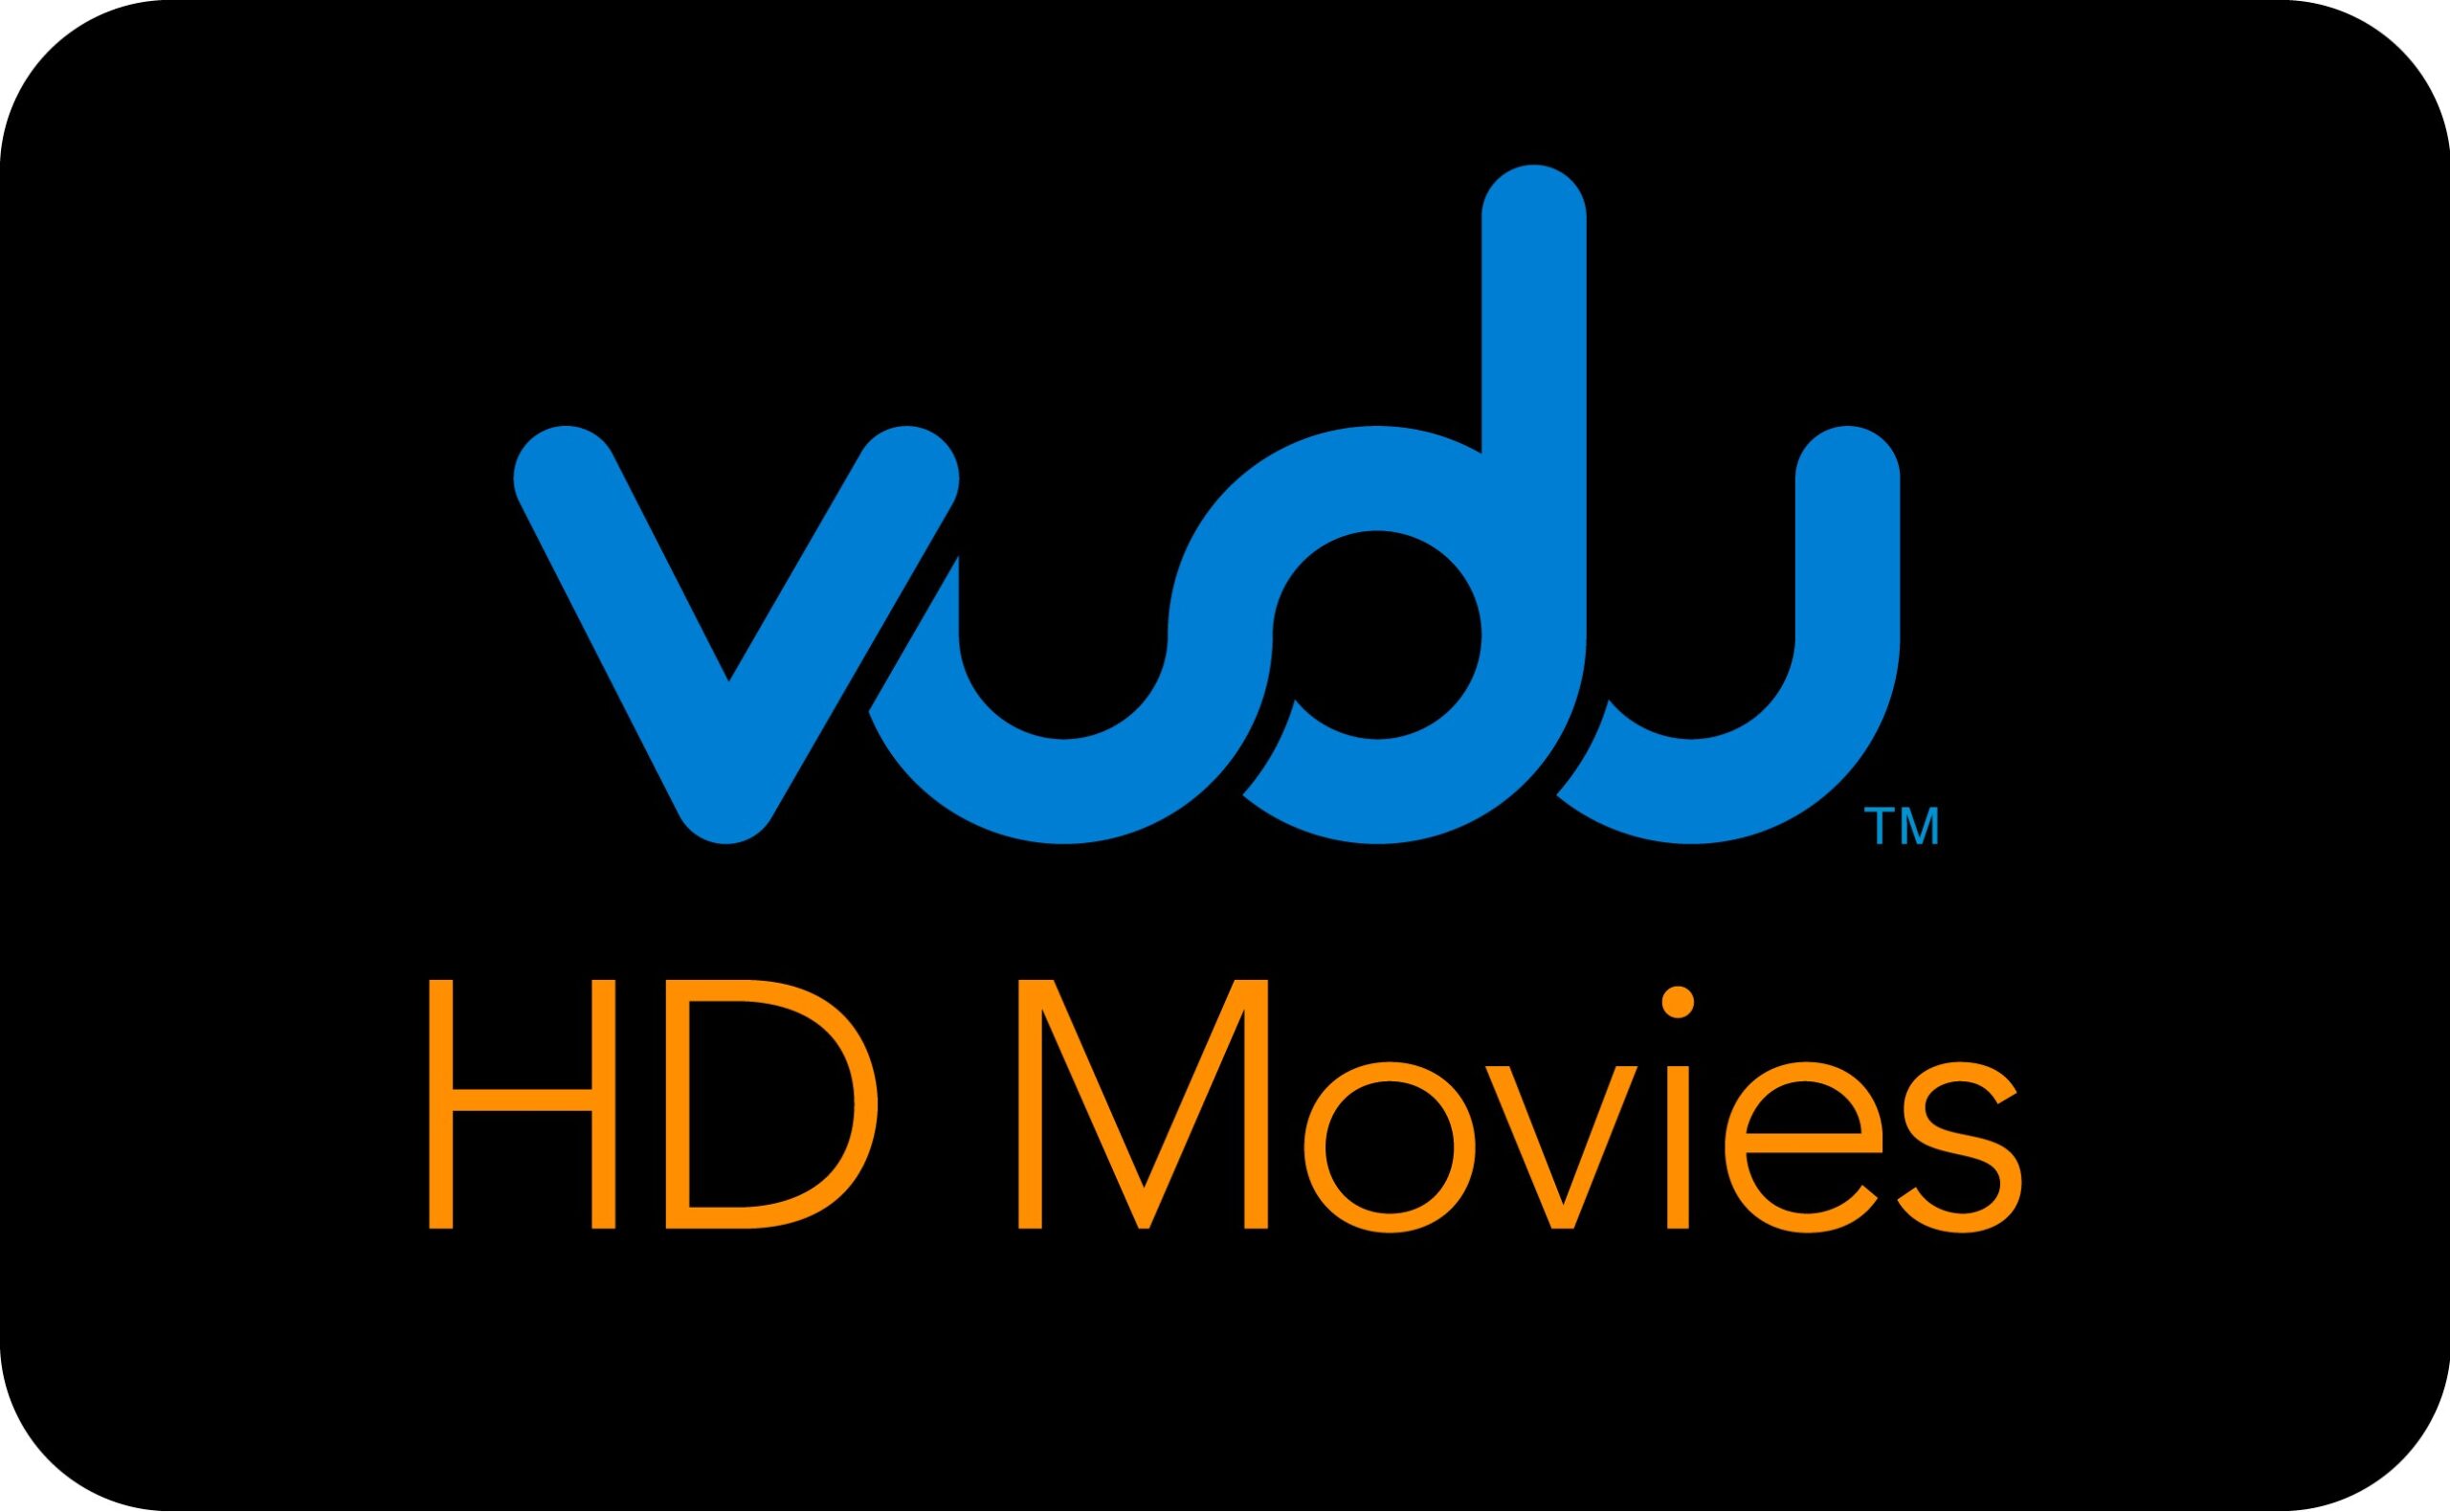 Vudu Not Working on PS4